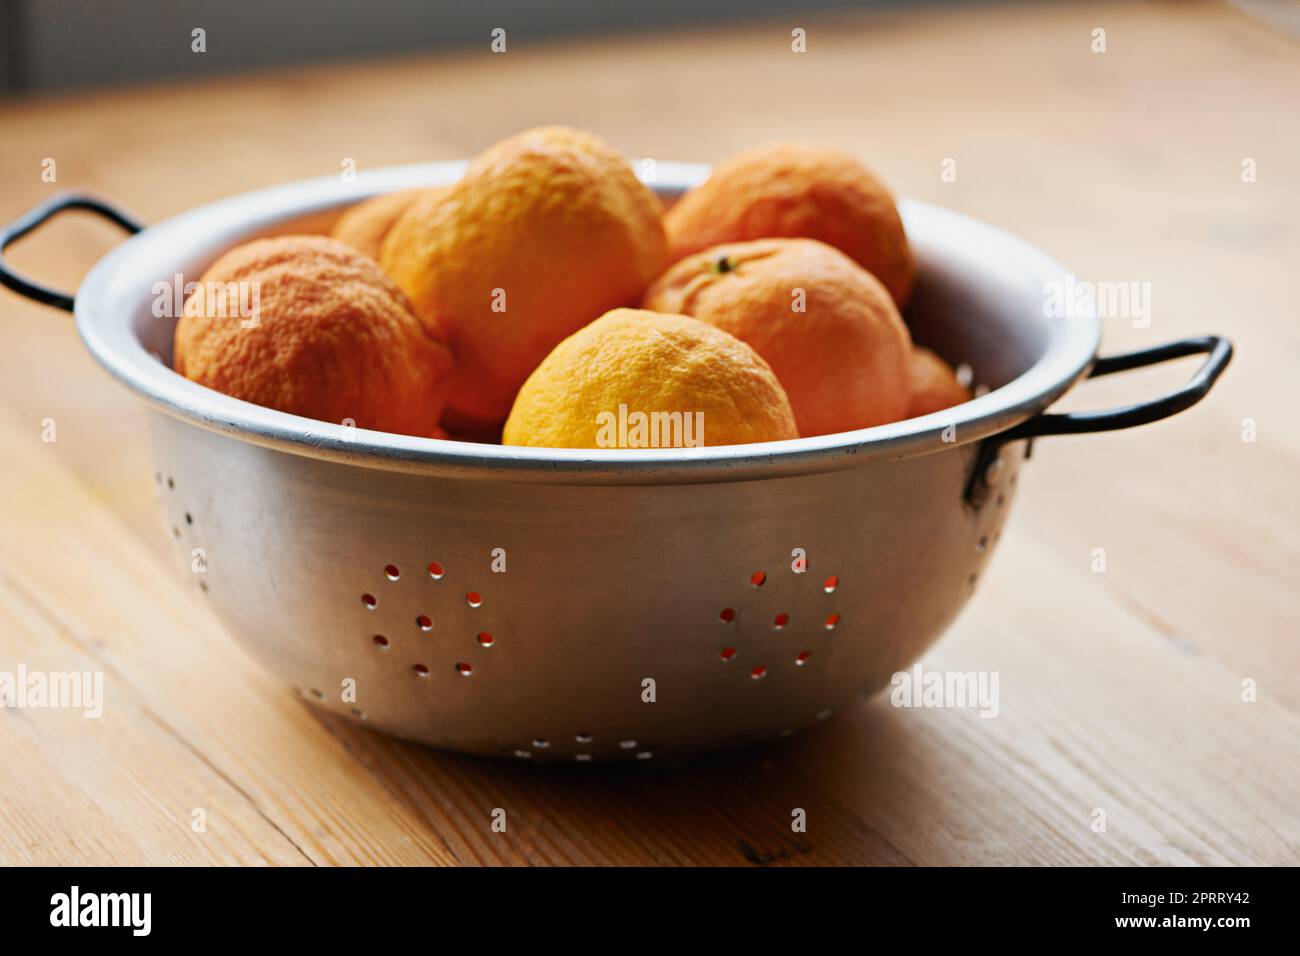 Citrus snacking. a colander full of tangerines on a kitchen table. Stock Photo